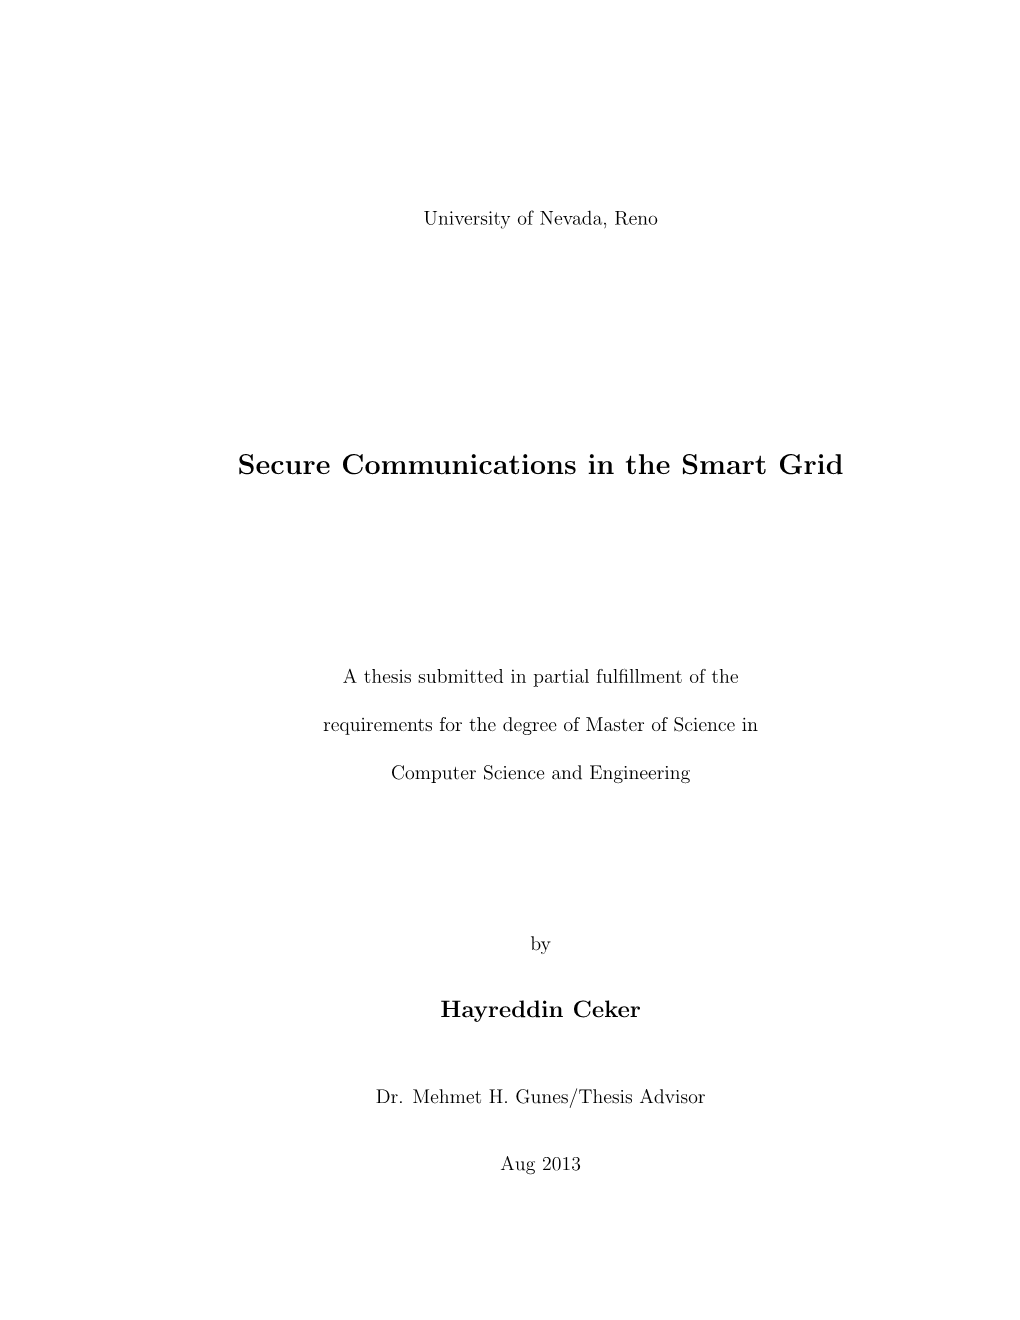 Secure Communications in the Smart Grid